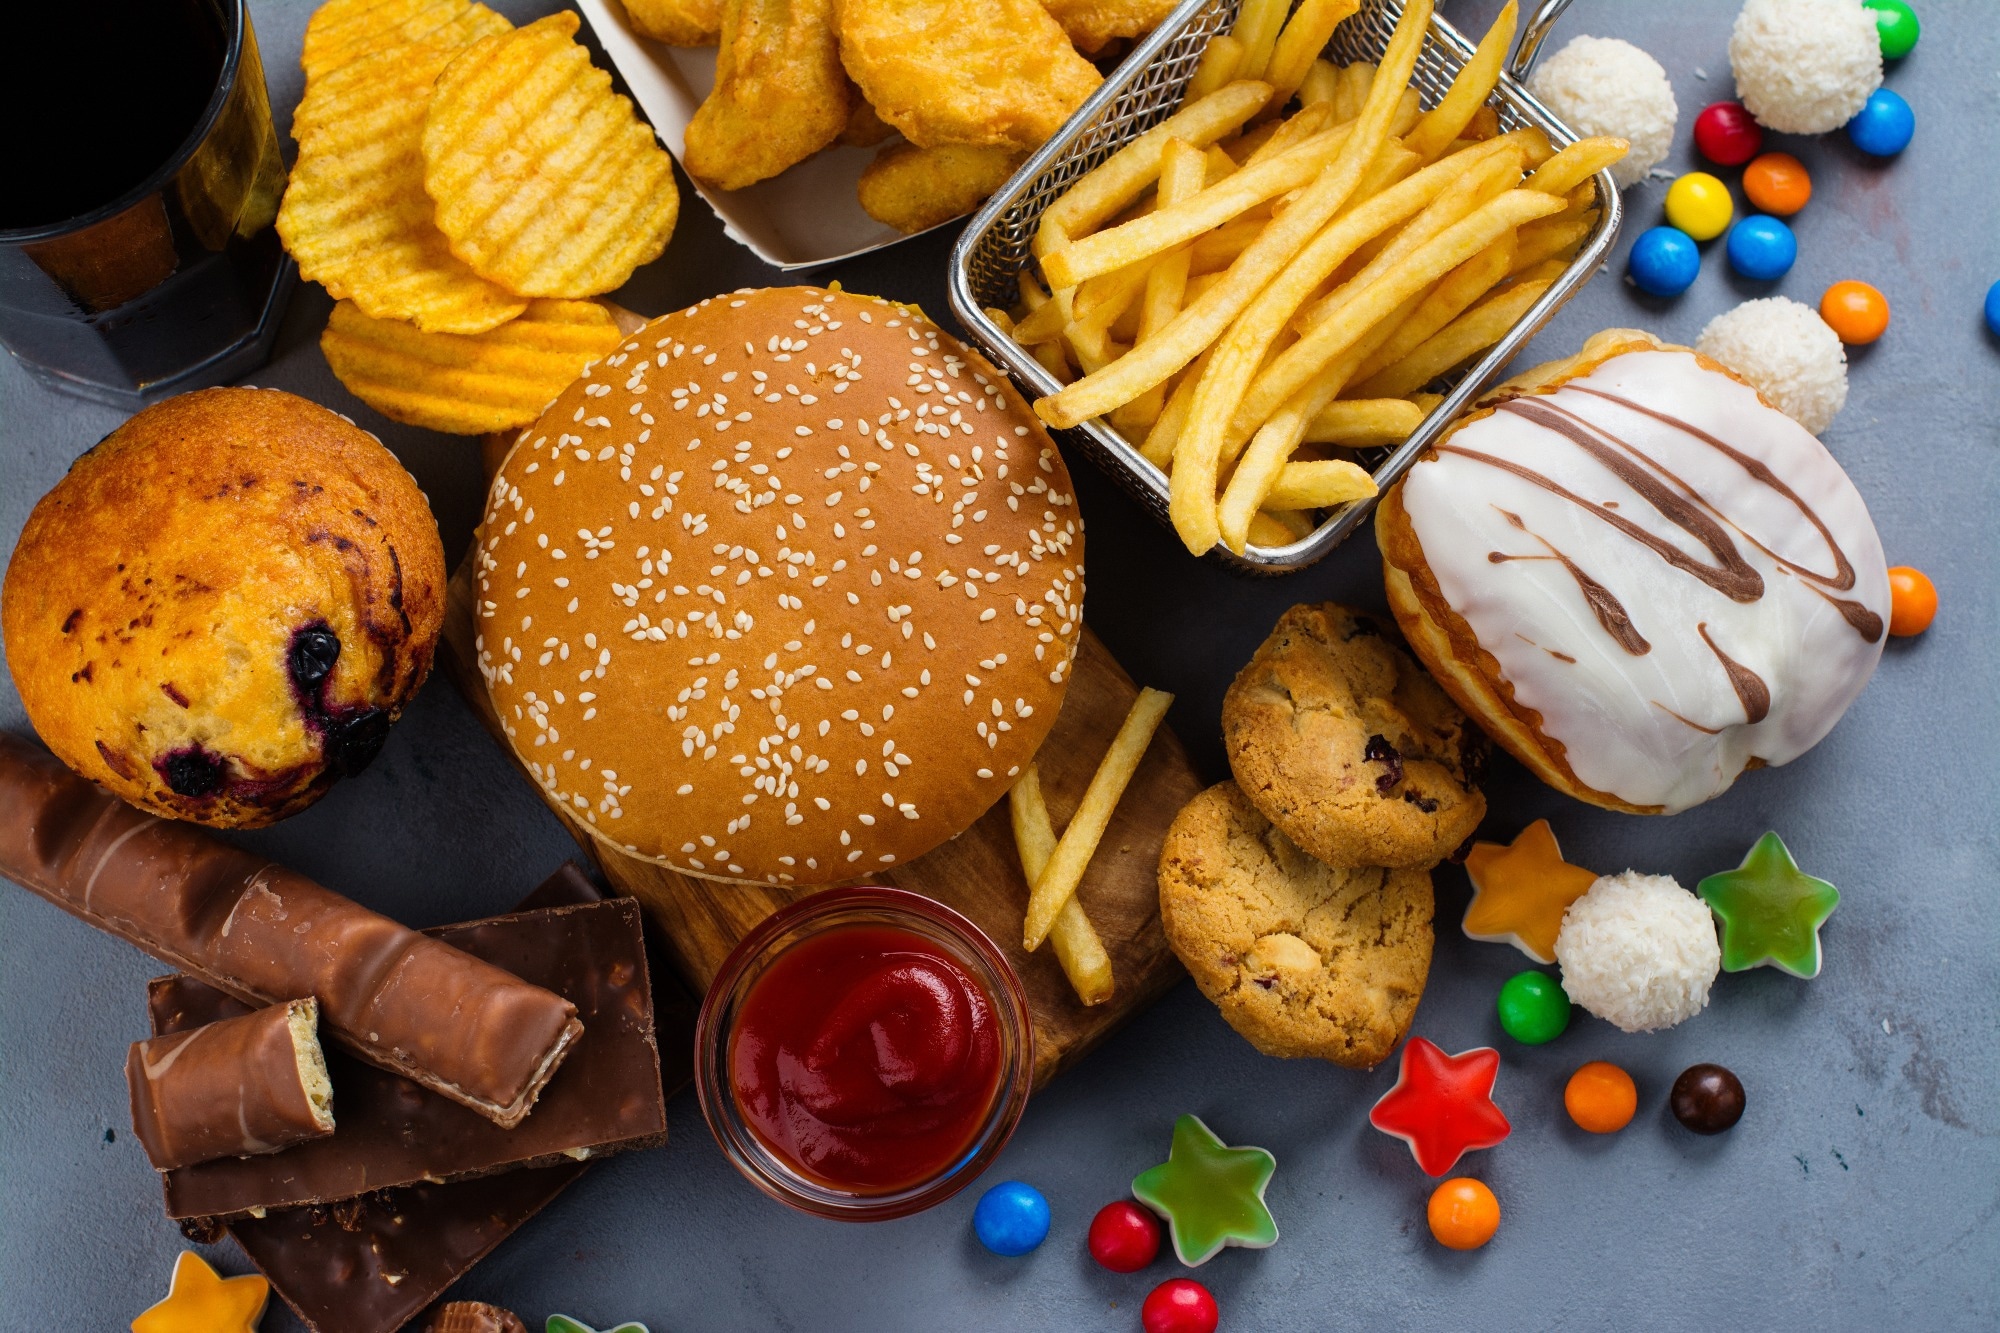 Study: High ultra-processed food consumption is associated with elevated psychological distress as an indicator of depression in adults from the Melbourne Collaborative Cohort Study. Image Credit: Ekaterina Markelova / Shutterstock.com